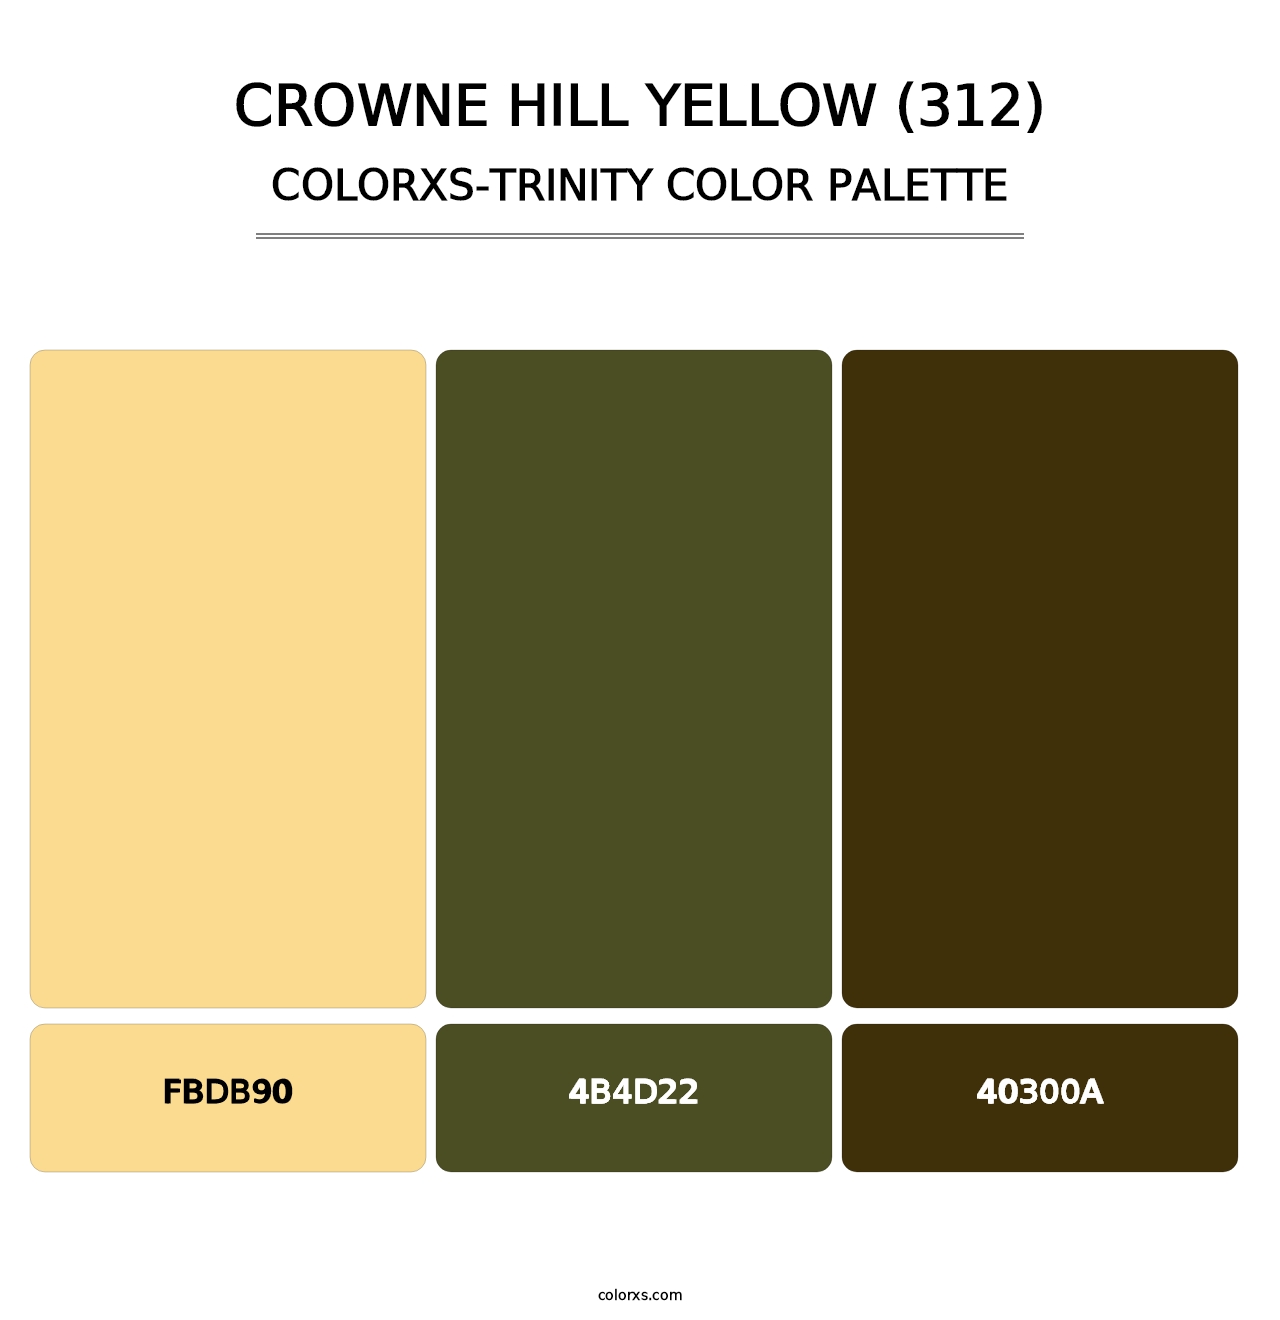 Crowne Hill Yellow (312) - Colorxs Trinity Palette